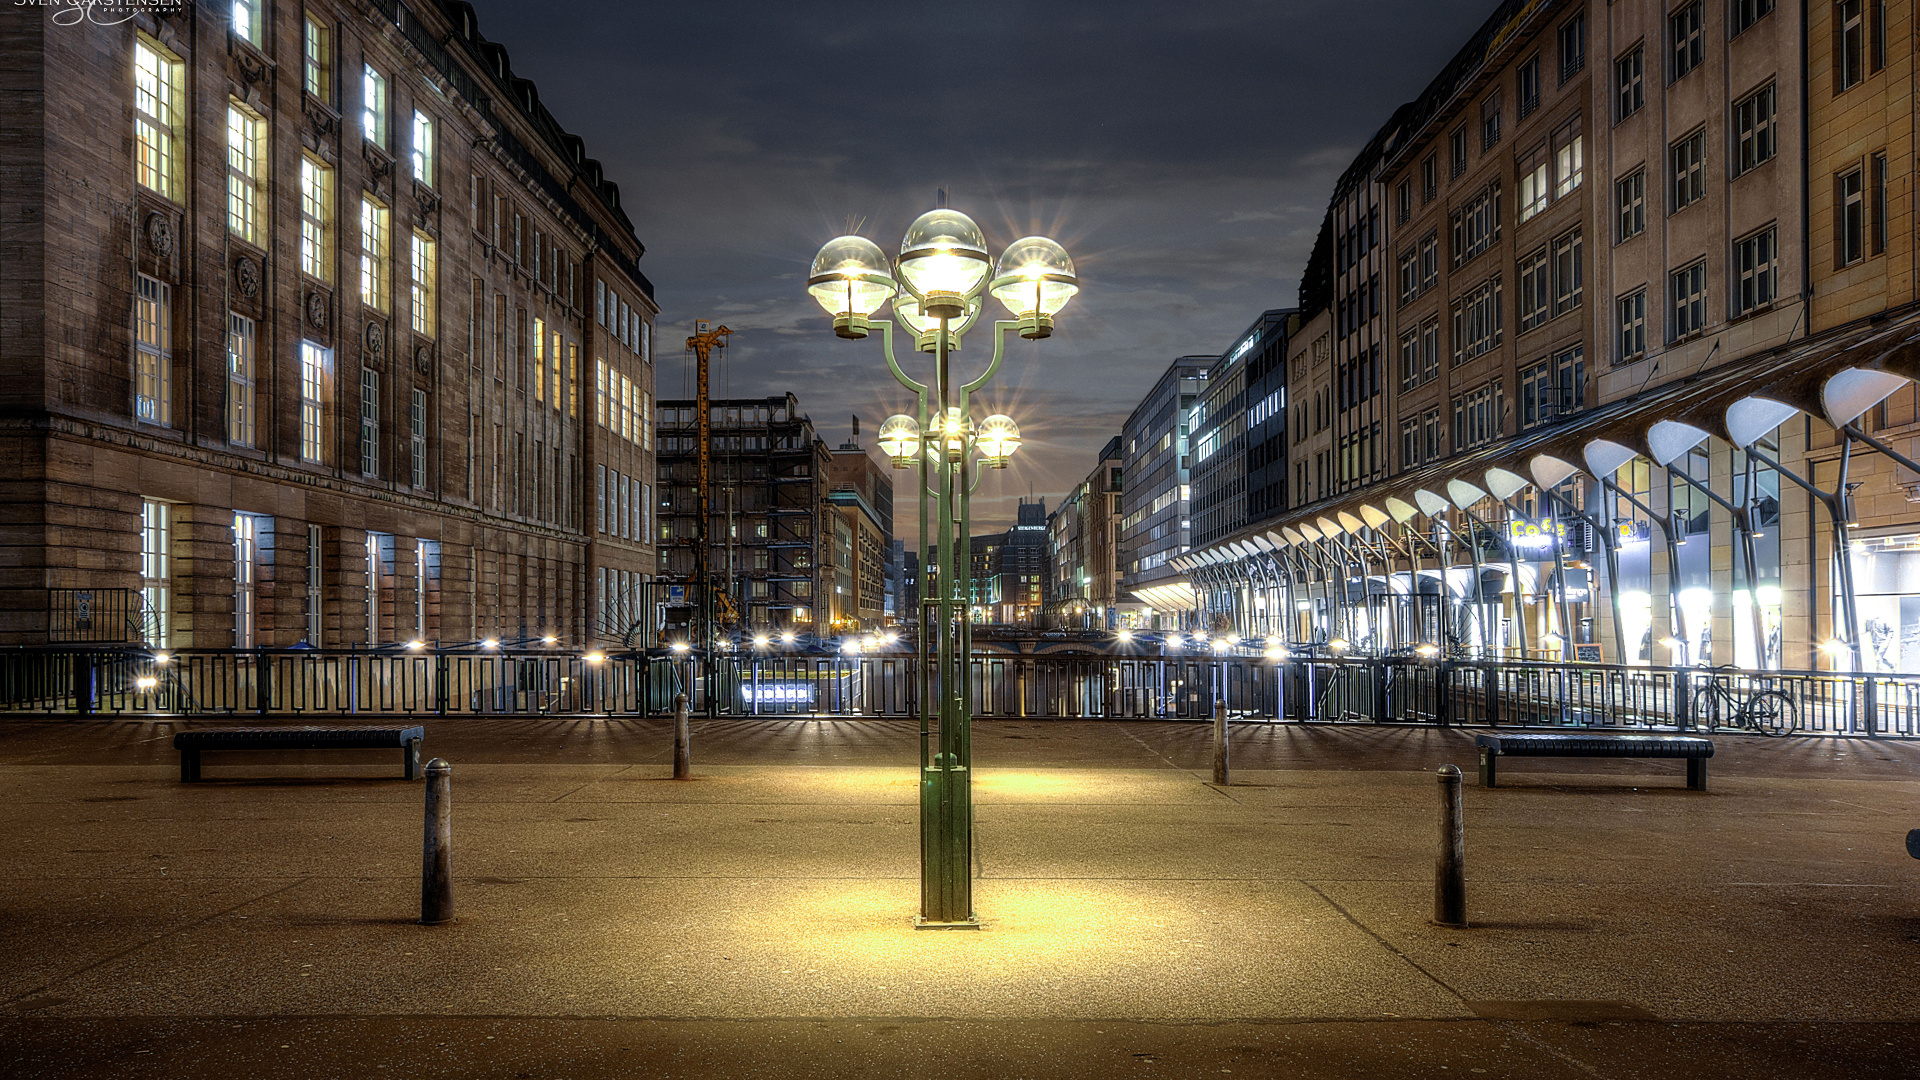 Lighted Street Lights in The Middle of The City During Night Time. Wallpaper in 1920x1080 Resolution